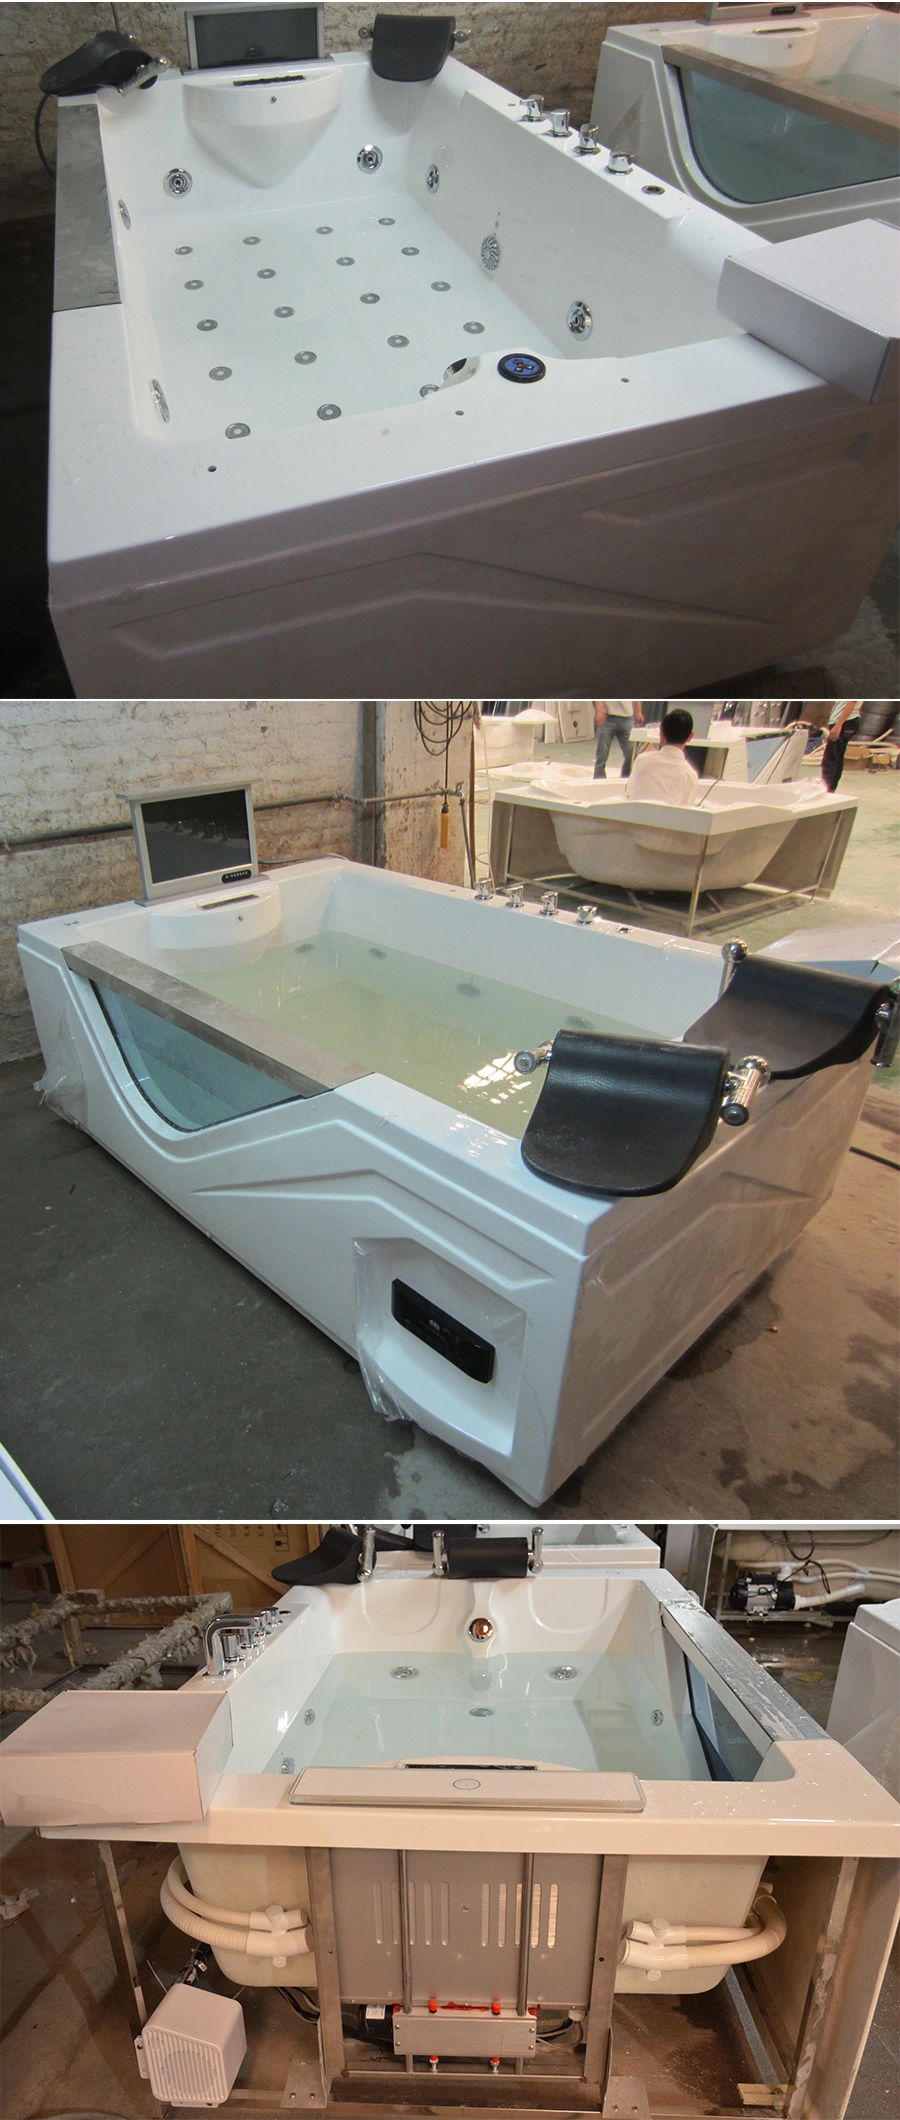 1.9m Length Acrylic Apron Couple Use American Ideal Standard Bathtubs Prices